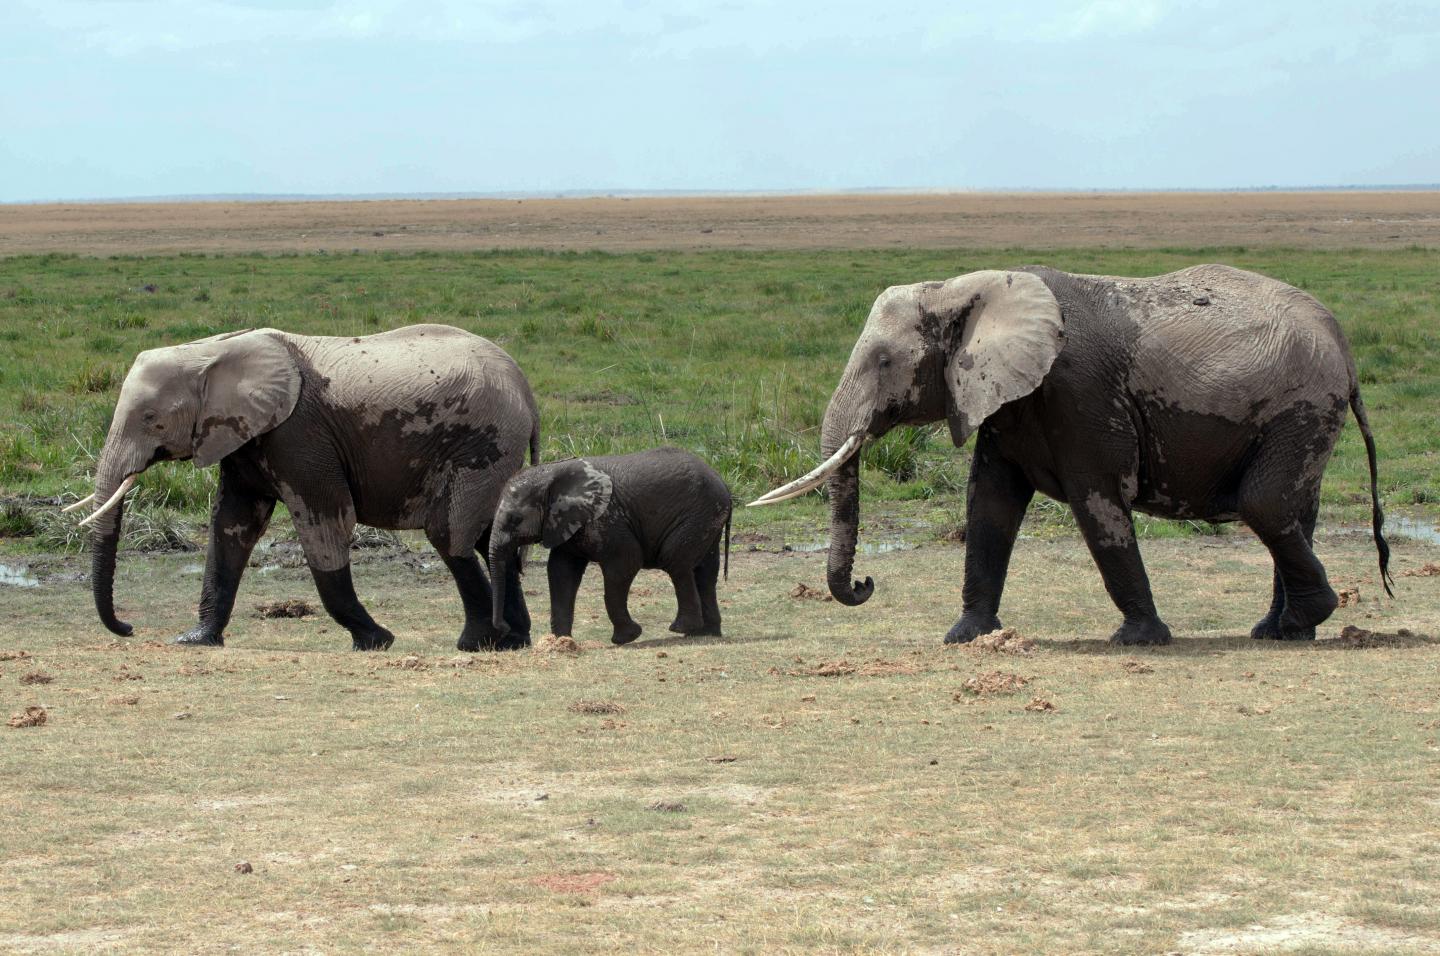 The African Elephant Is the Largest Animal on Land, but not the Fastest